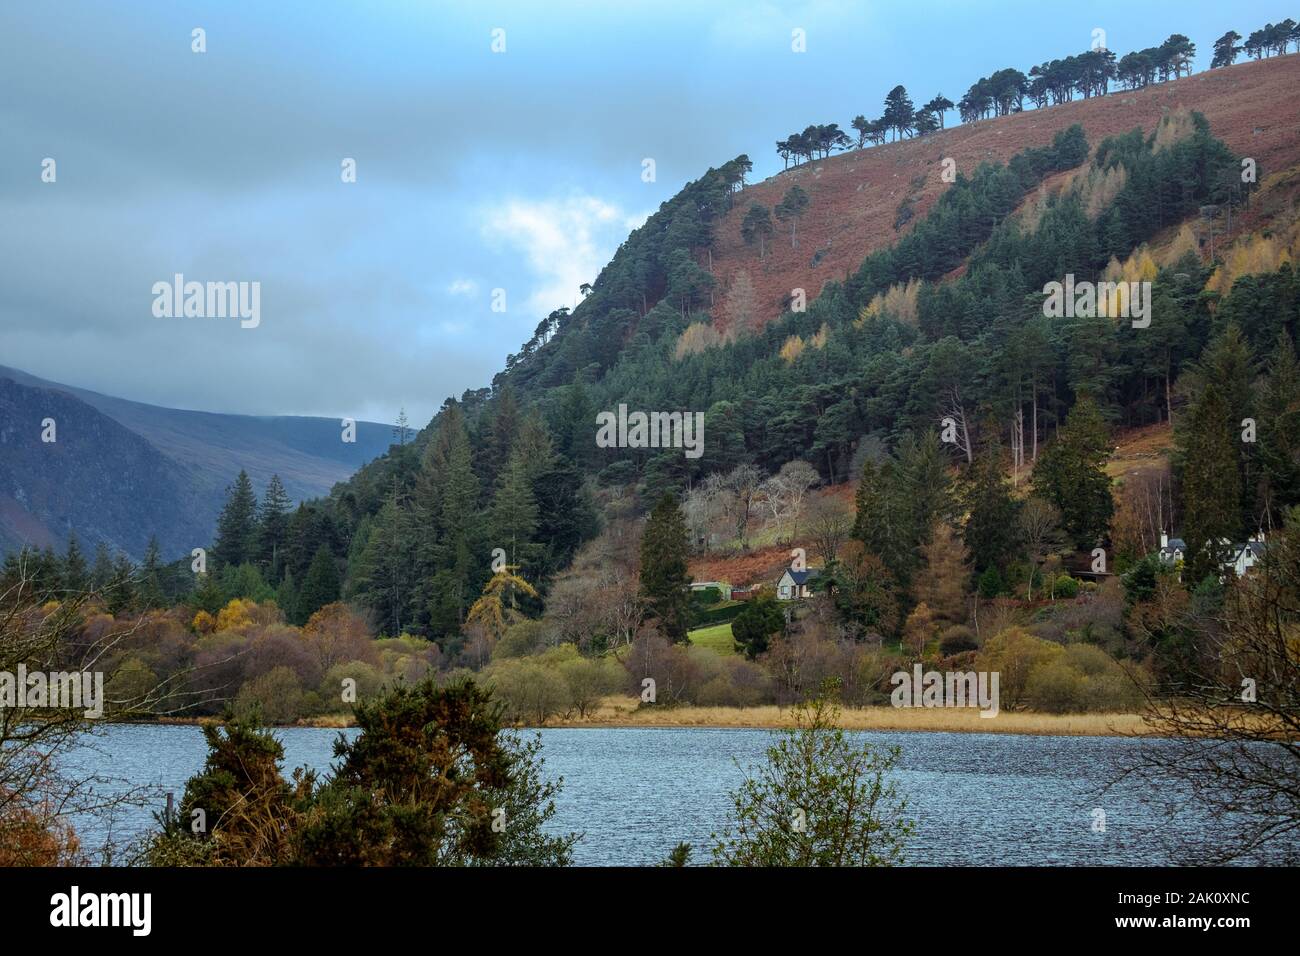 A pine forest climbs upon a steep hill at the lakeside in Glendalough, Wicklow Mountains National Park. Some isolated houses between the trees. Stock Photo